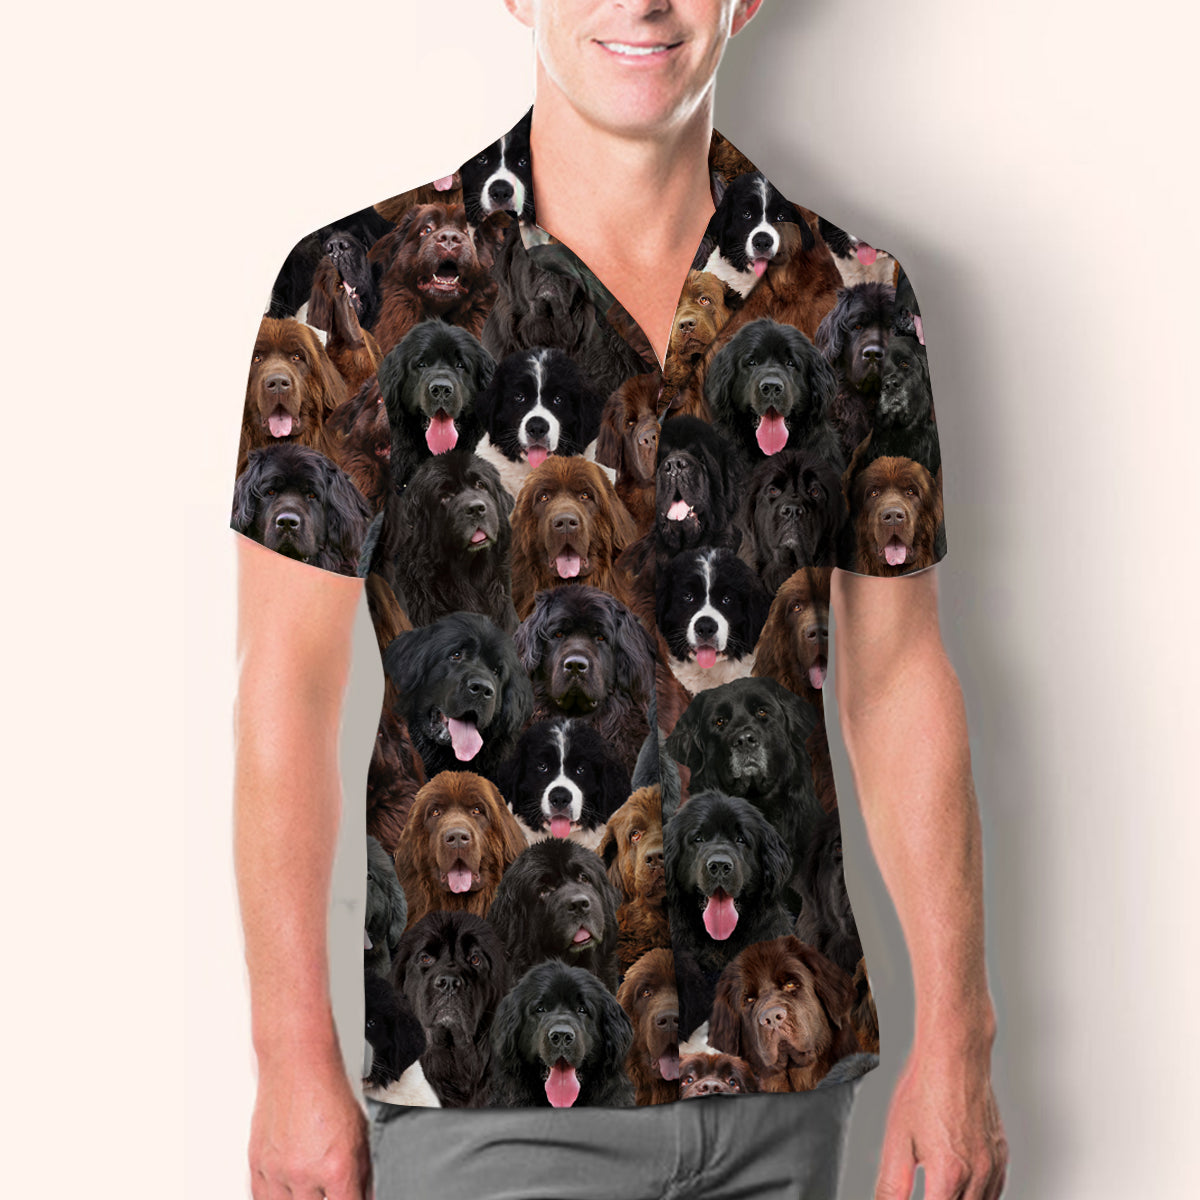 You Will Have A Bunch Of Newfoundlands - Shirt V1